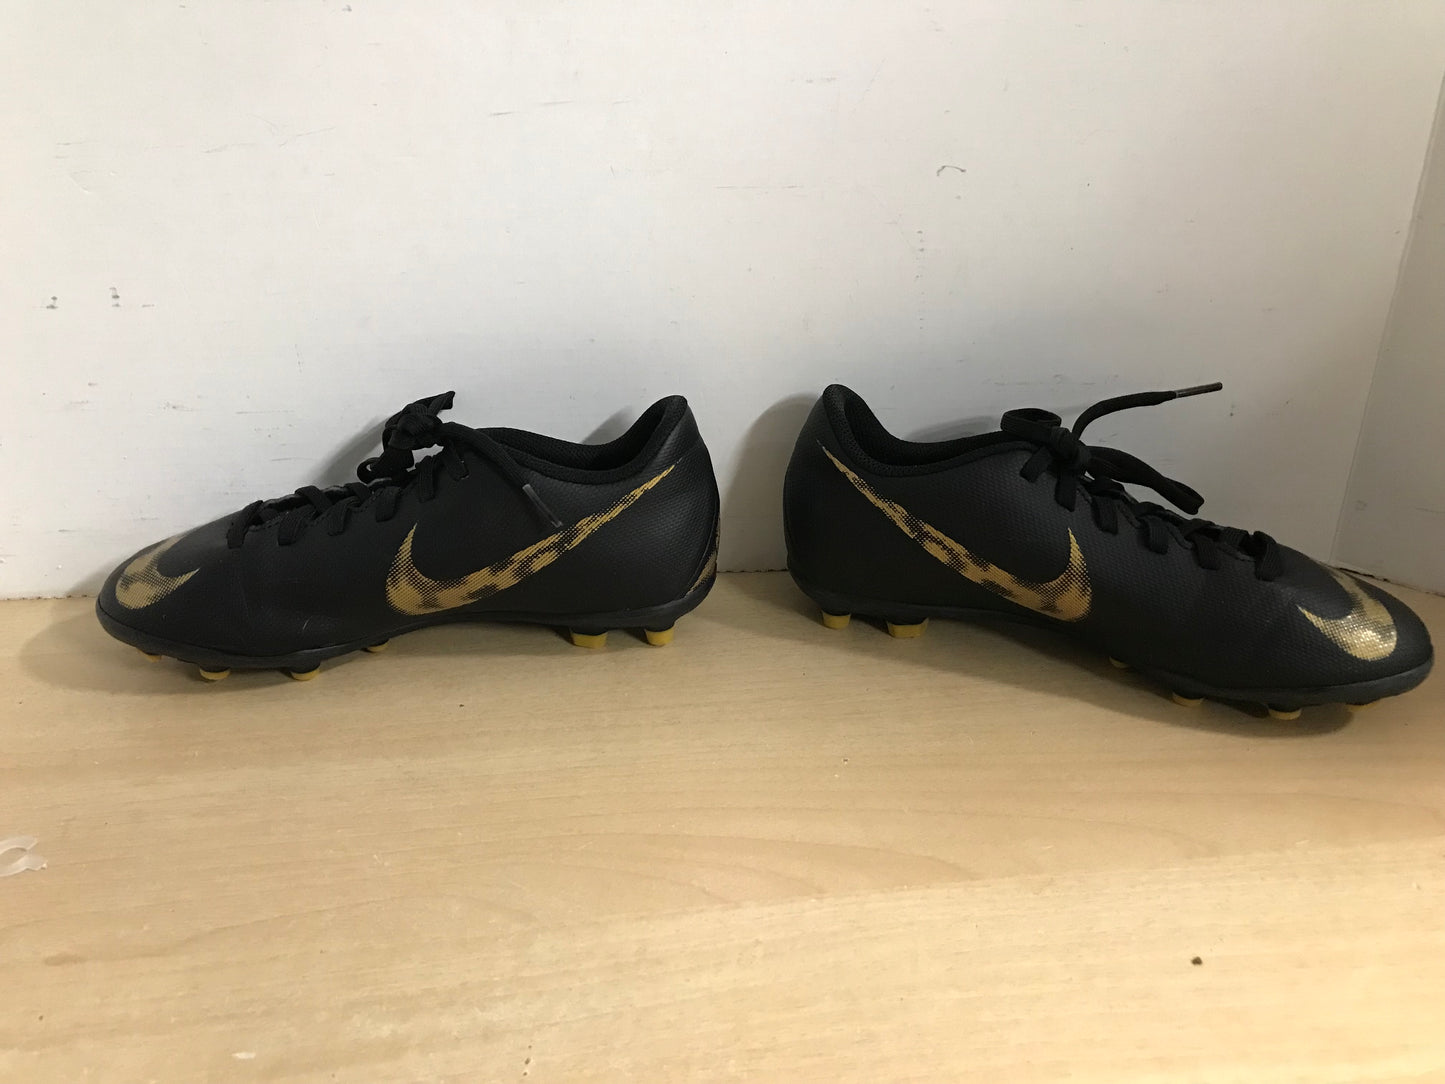 Soccer Shoes Cleats Child Size 4 Nike Mercurial Black Gold New Demo Model